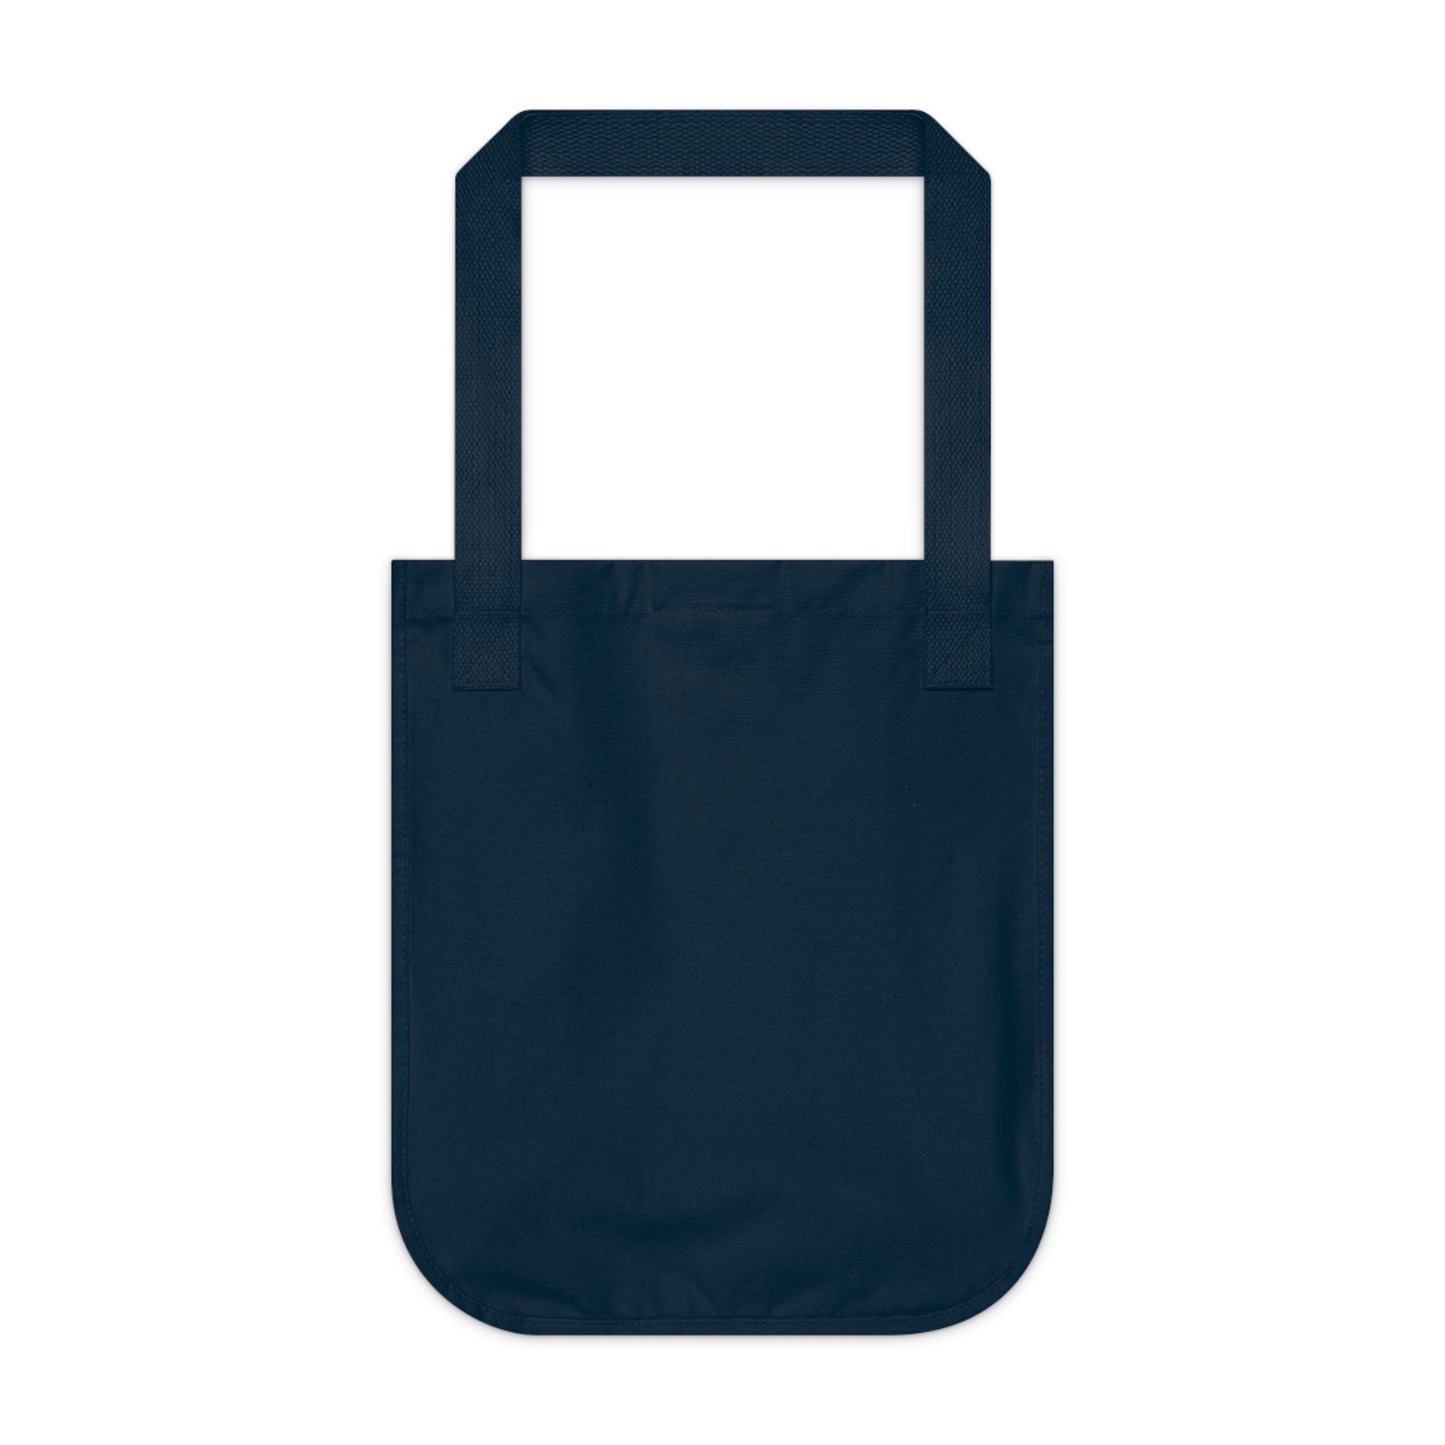 Home Artistry: A Creative Exploration of Objects Around You - Bam Boo! Lifestyle Eco-friendly Tote Bag